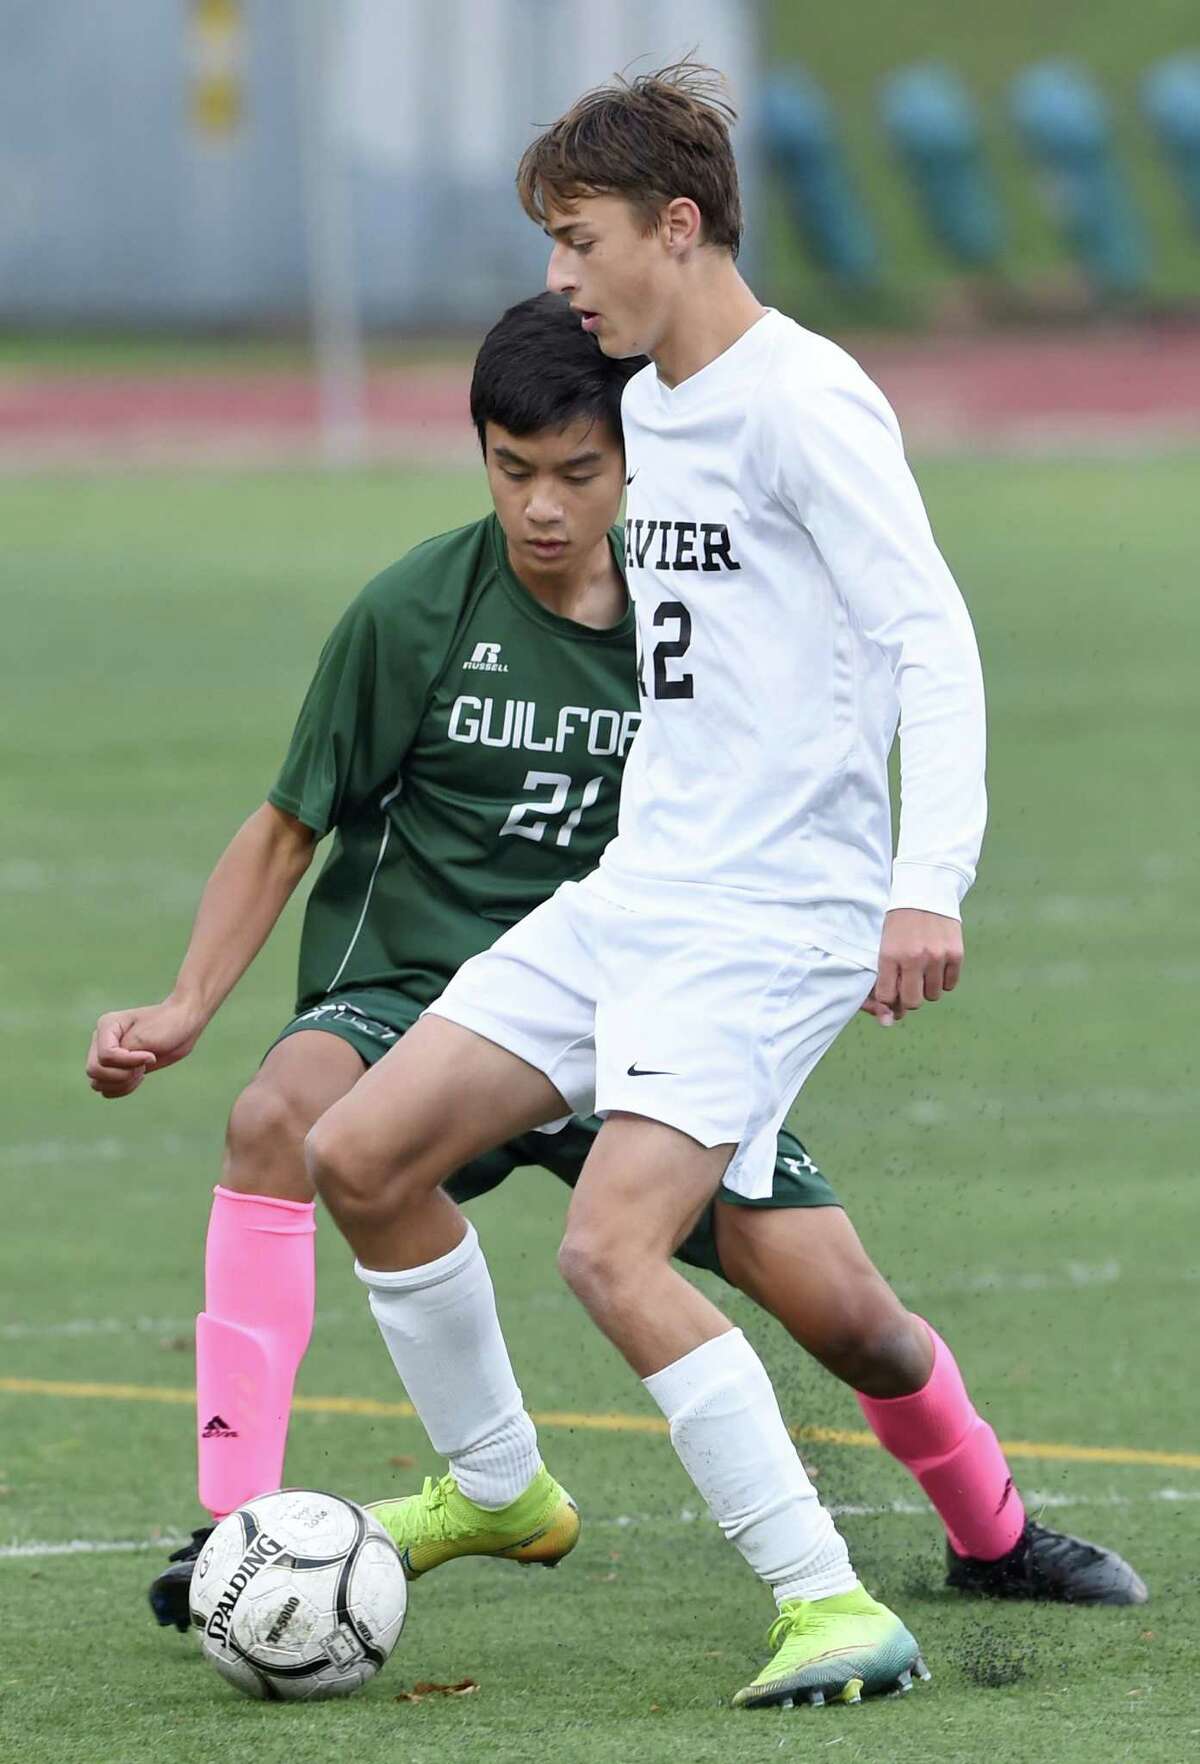 Joshua Chen of Guilford (left) and Ryan Gerry of Xavier fight for the ball in Guilford on October 27, 2020.